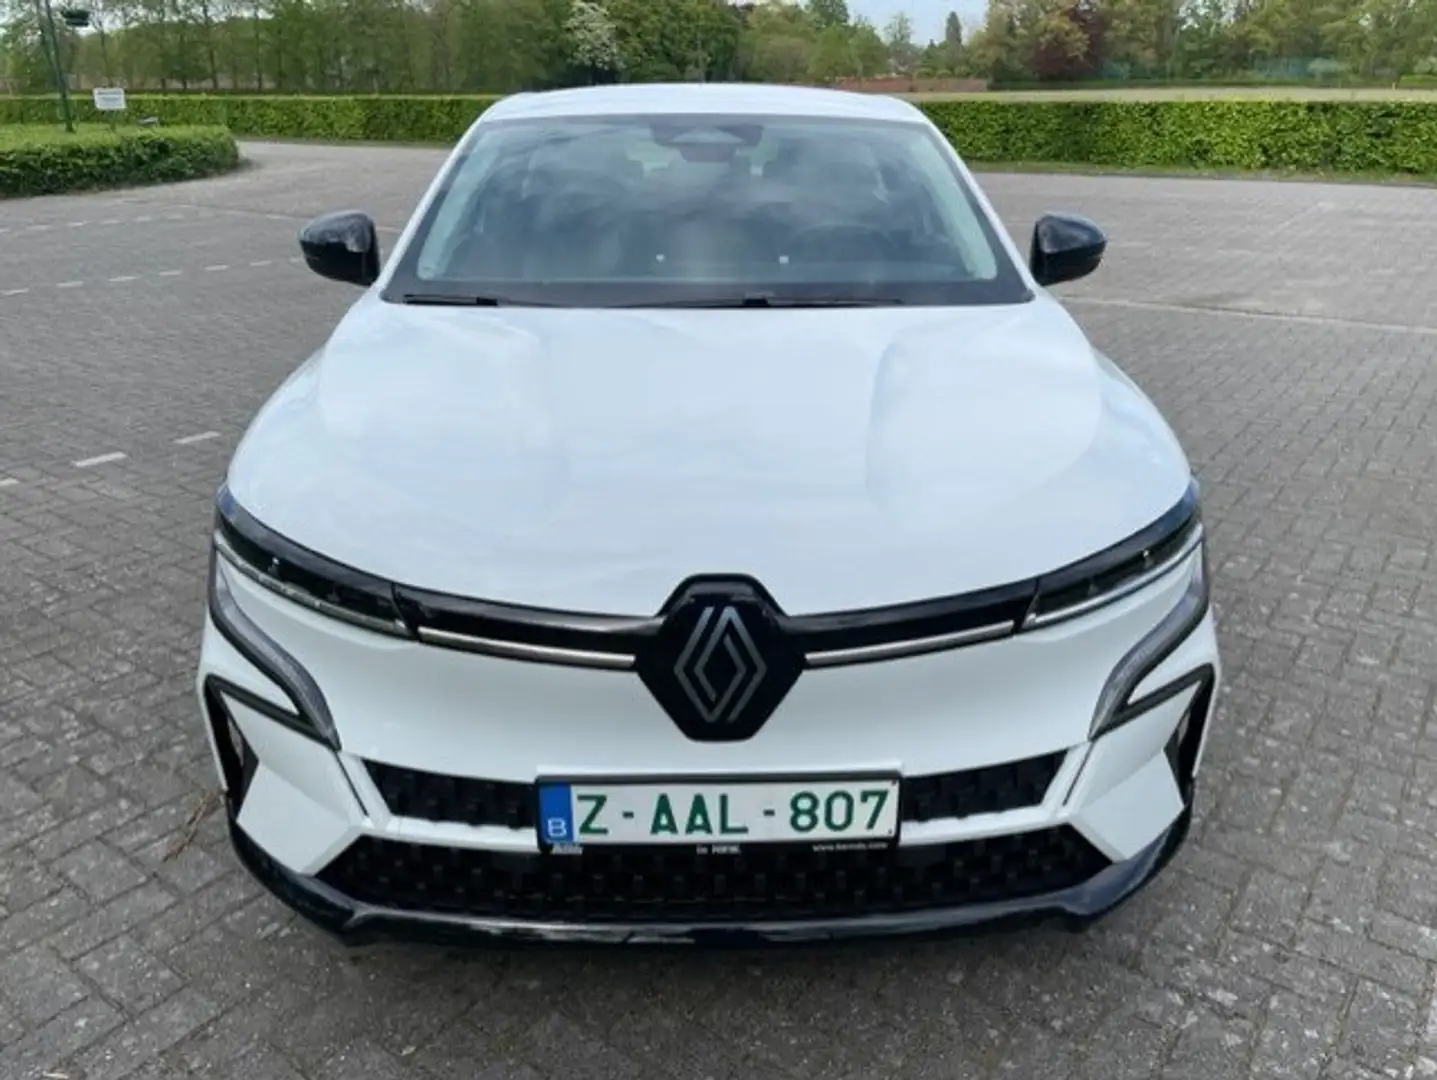 Renault Megane E-Tech 40 kWh Equilibre R130 Standard charge DEMOWAGEN Blanc - 2